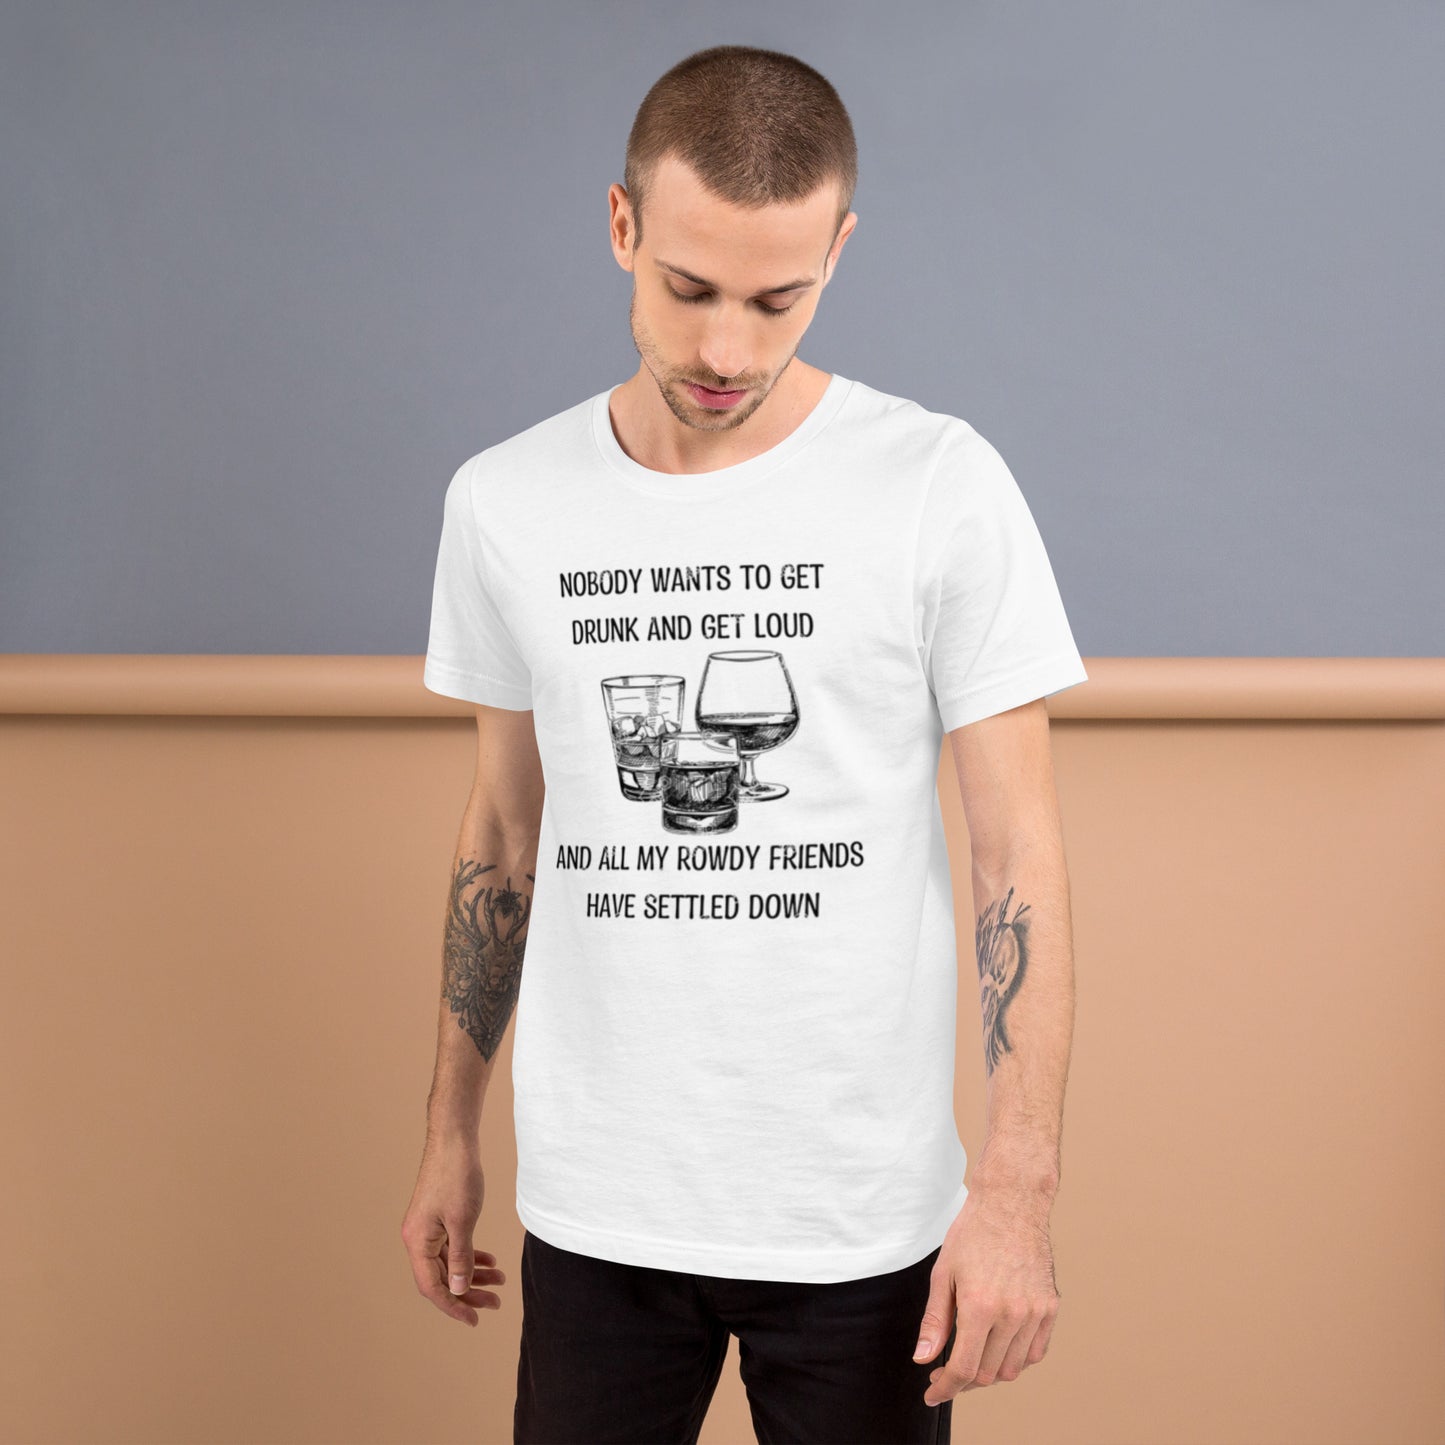 No One Wants - Classic Country Tees